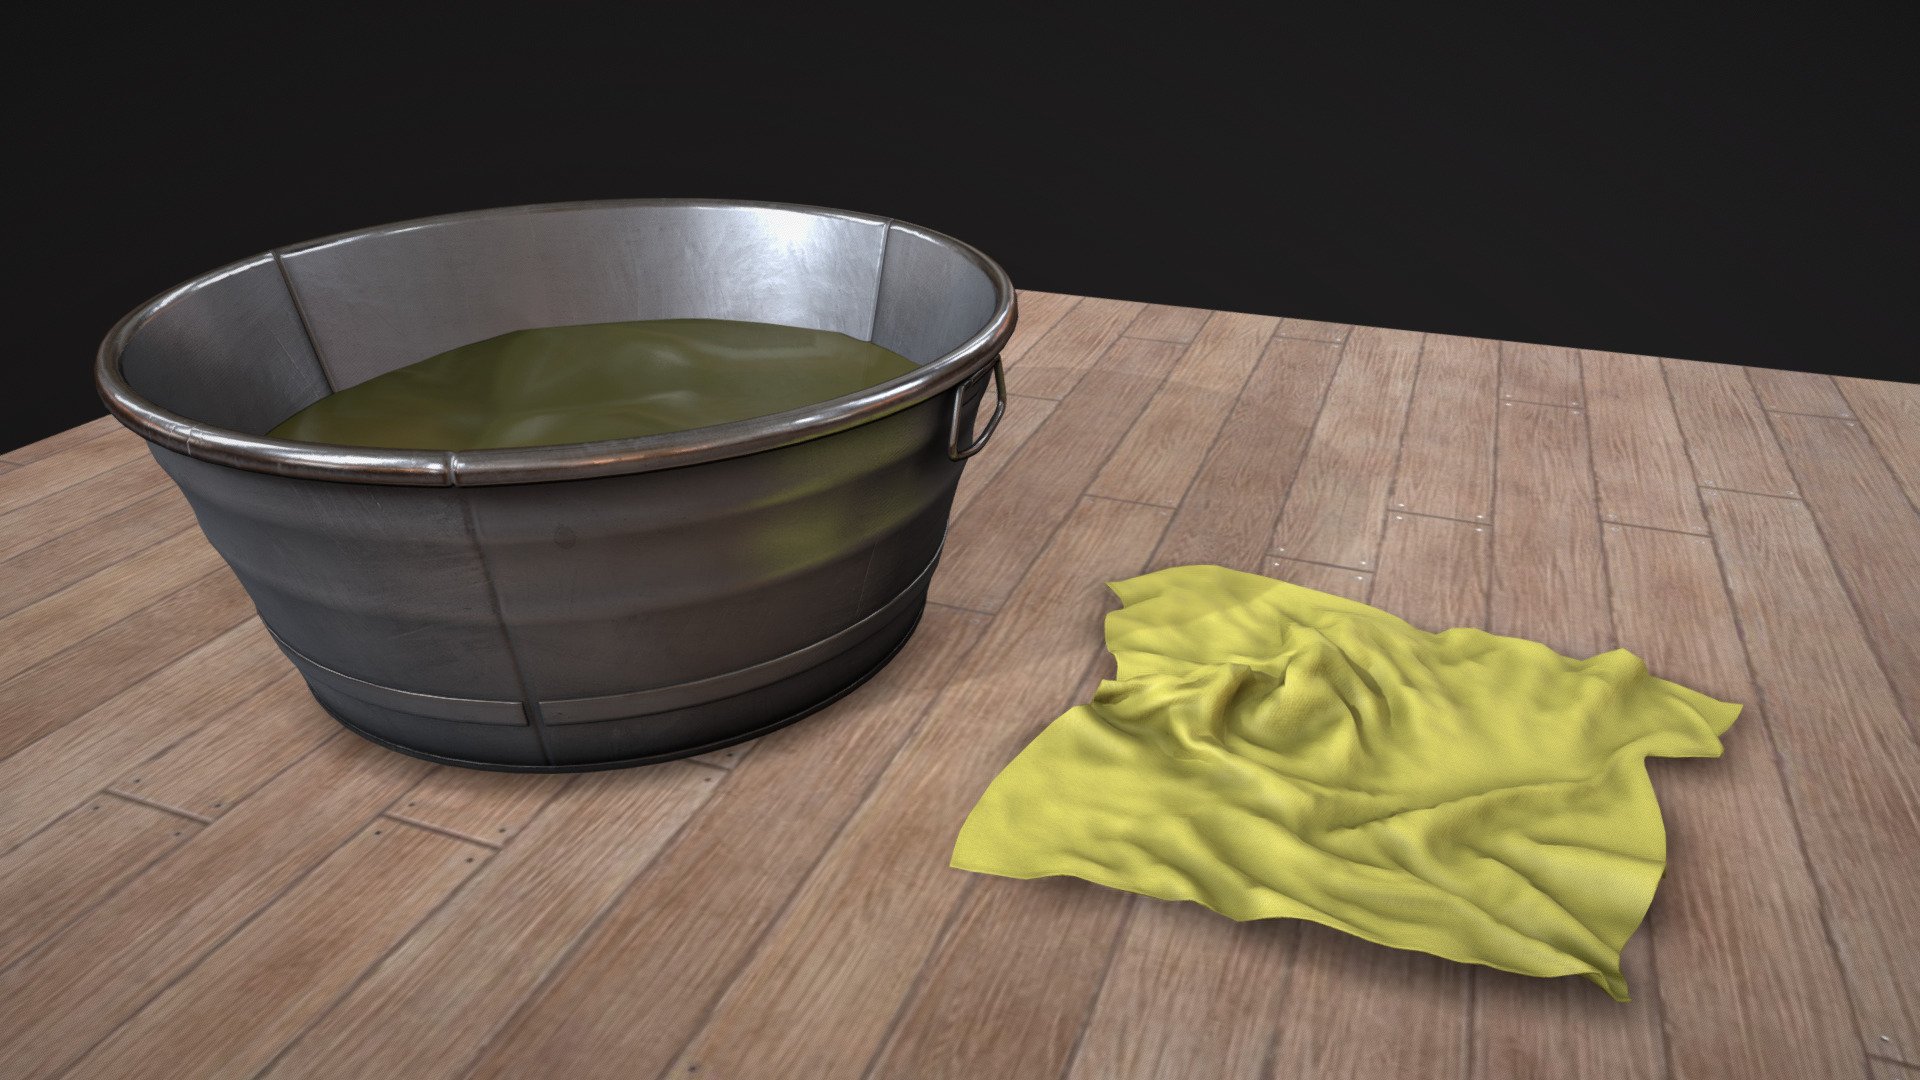 Bucket scene

Made in Blender and textured in Substance Painter.

Rag was reduced from around 100k tris to 4.5k 3d model